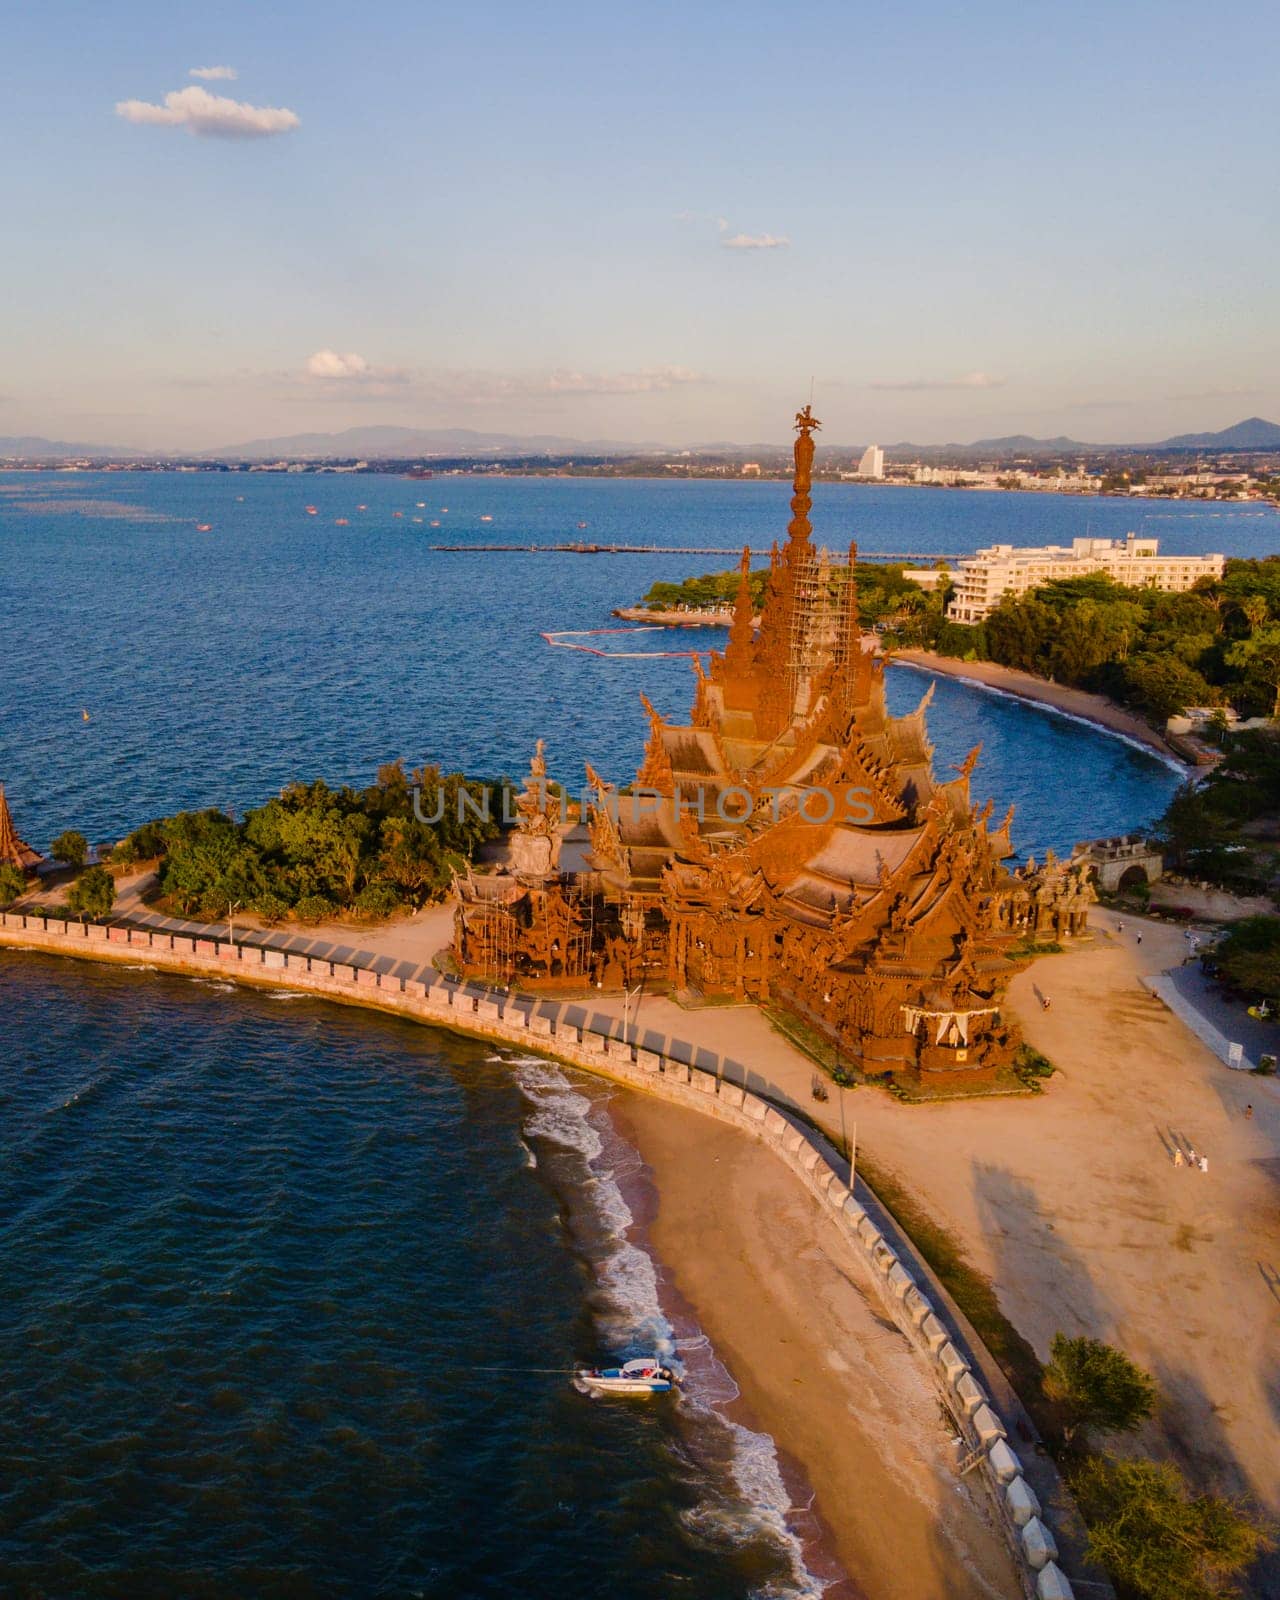 The Sanctuary of Truth wooden temple in Pattaya Thailand is a gigantic wooden construction located at the cape of Naklua Pattaya City